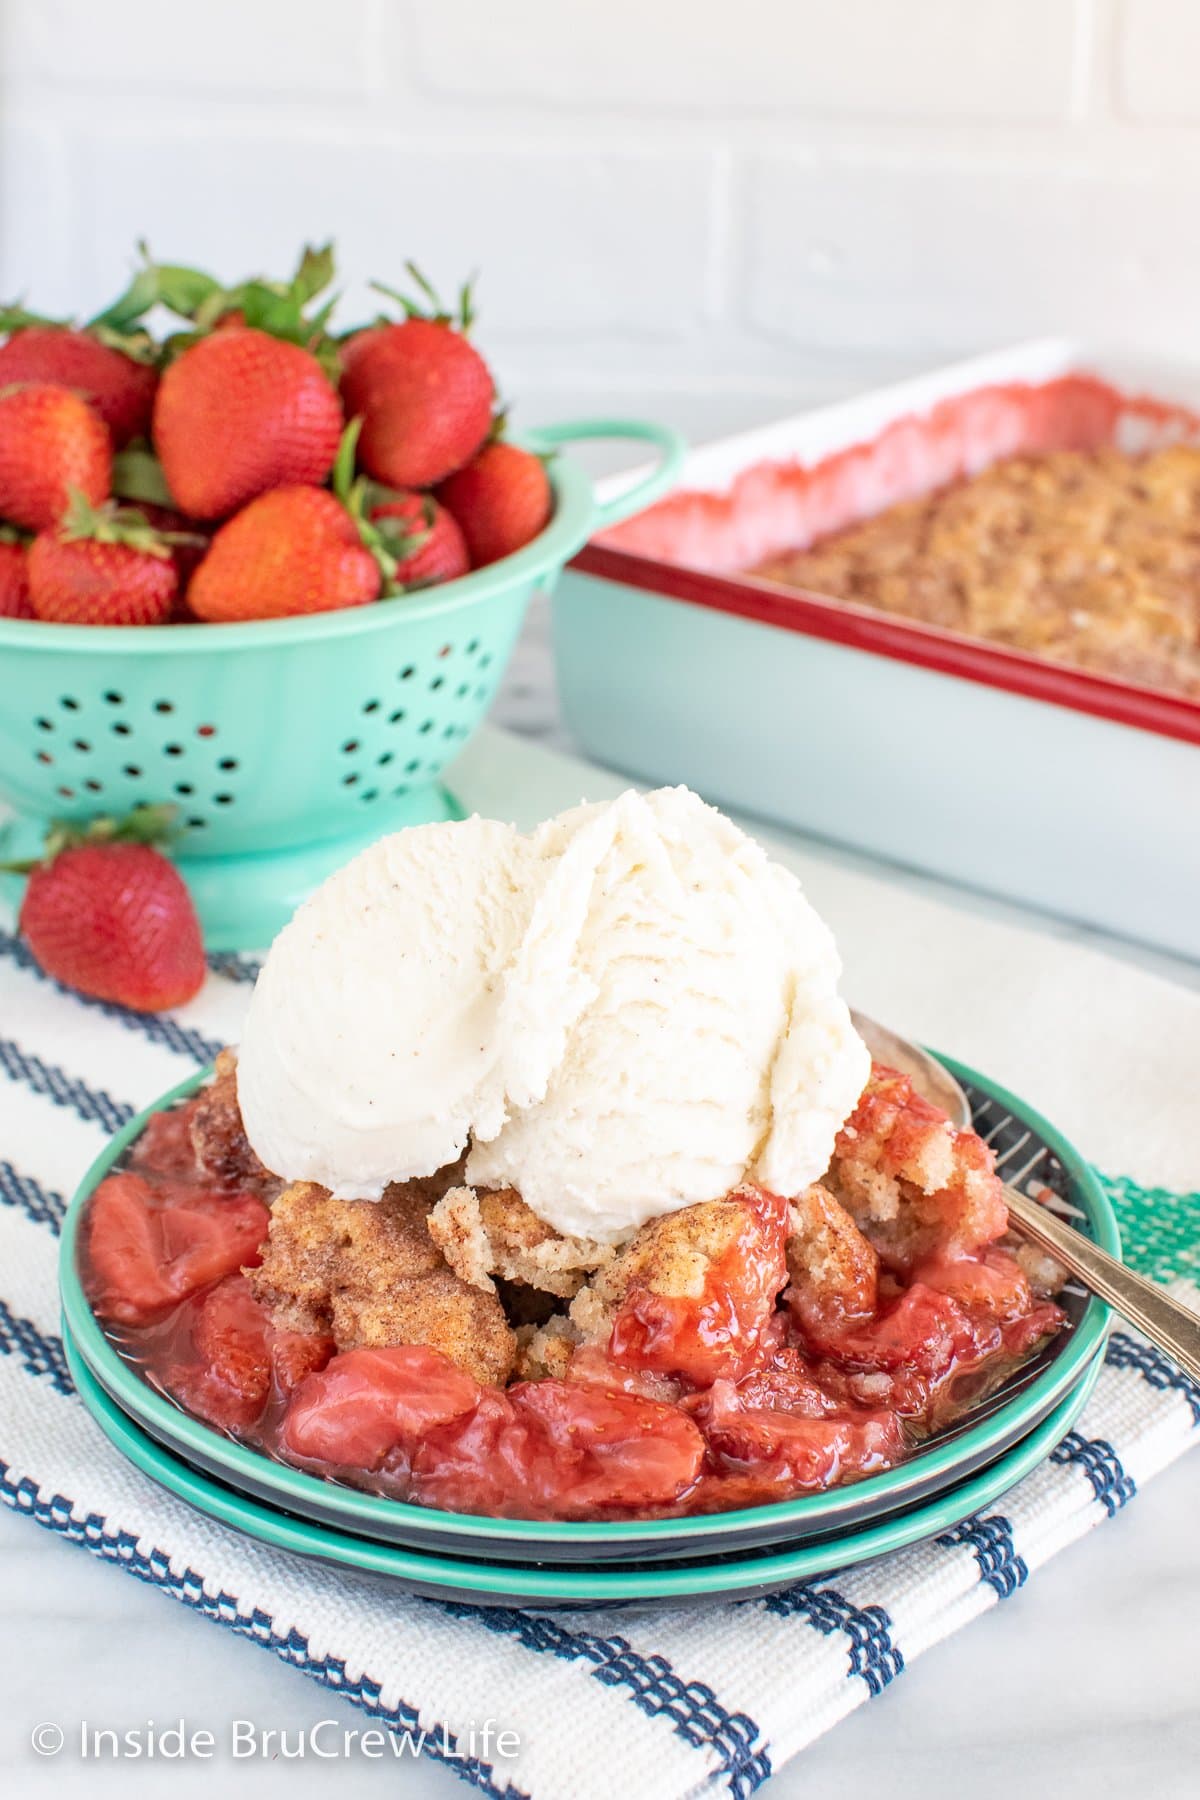 Strawberry cobbler topped with vanilla ice cream on a plate.